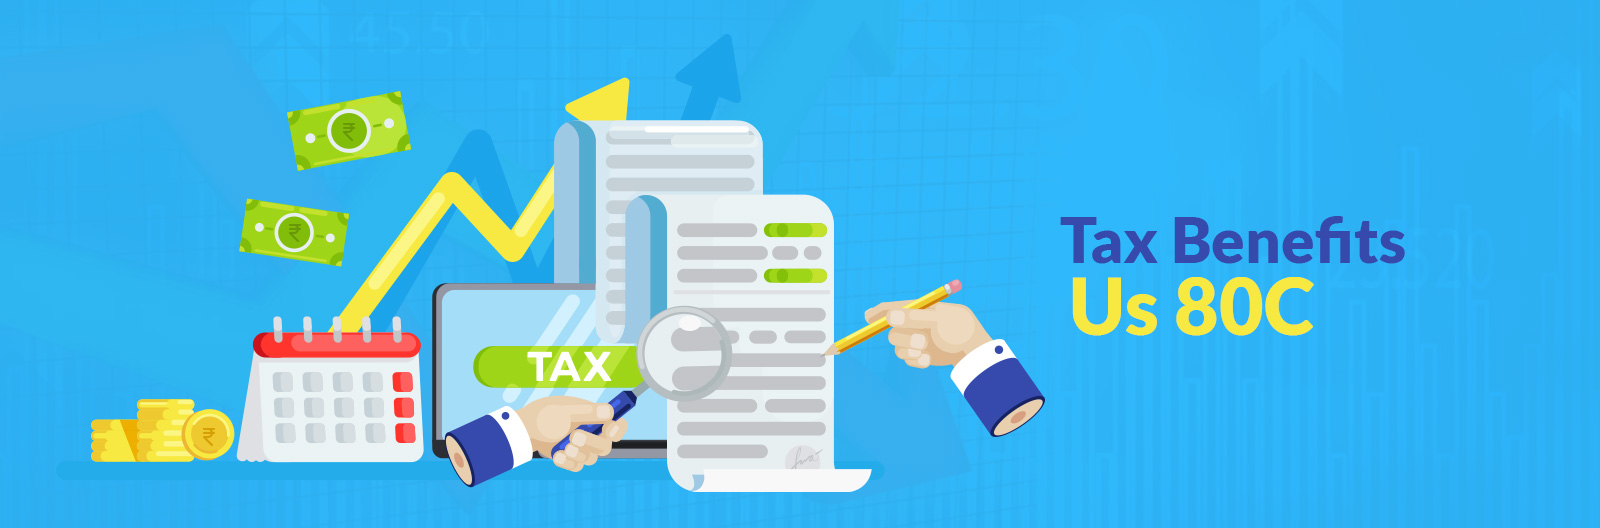 What are the benefits of Tax? Types of Tax Benefits 80C Tax Benefits